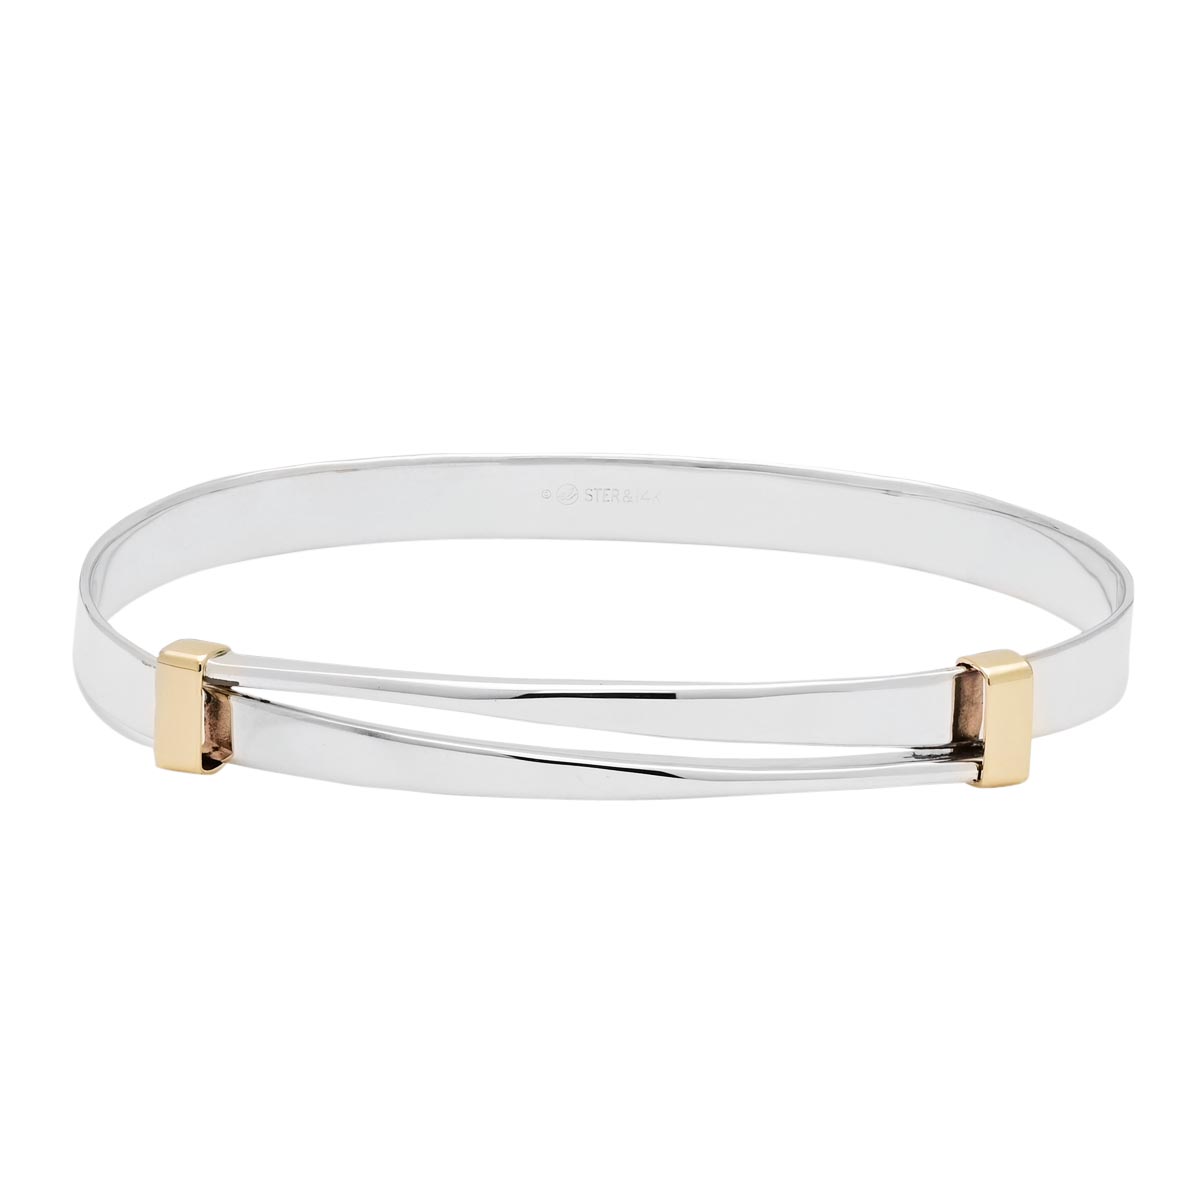 E.L. Designs Continental Bracelet in Sterling Silver and 14kt Yellow Gold